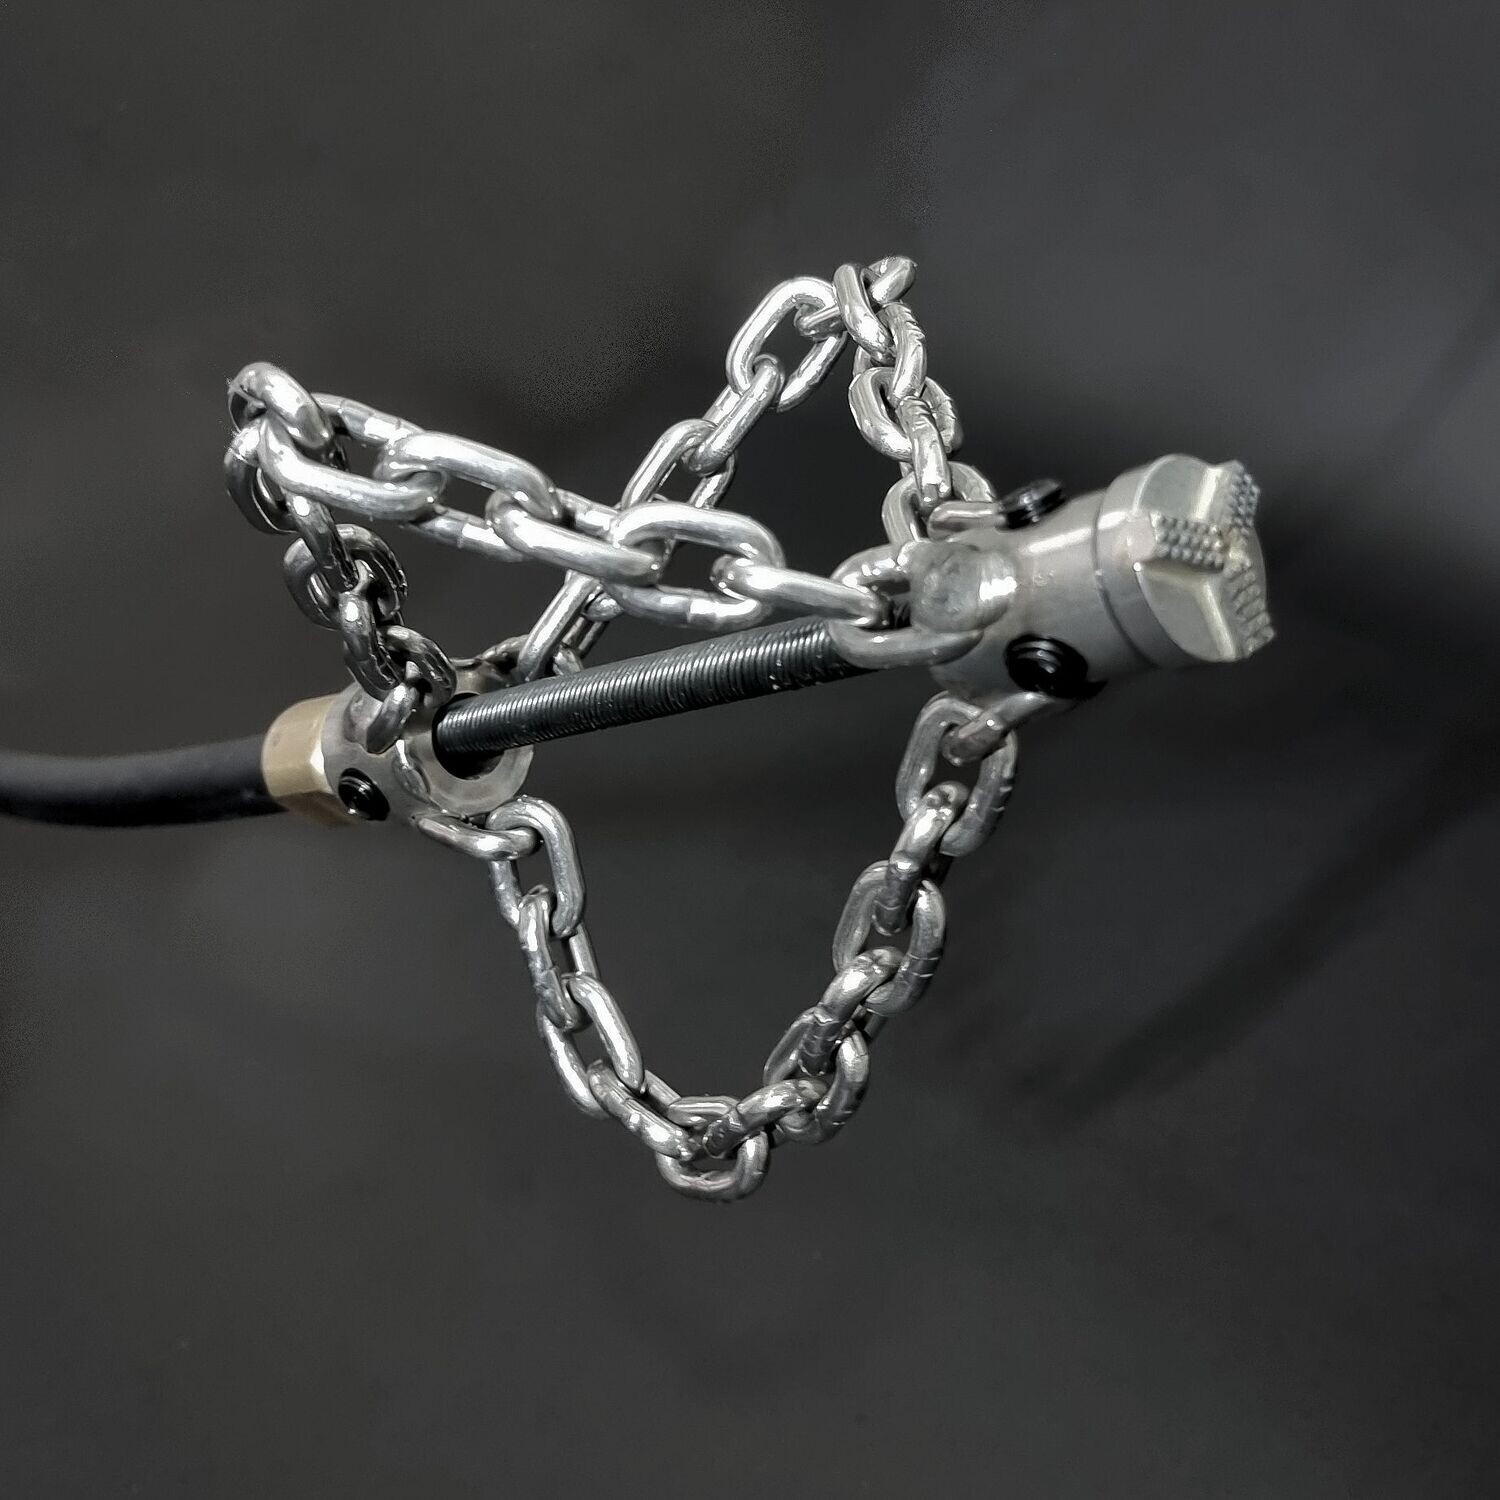 Lightweight - Plain Chain With Drill Head used with Ridgid snake drain and Boldan toilet auger for obstruction removal and cleaning limescale in PVC pipes 